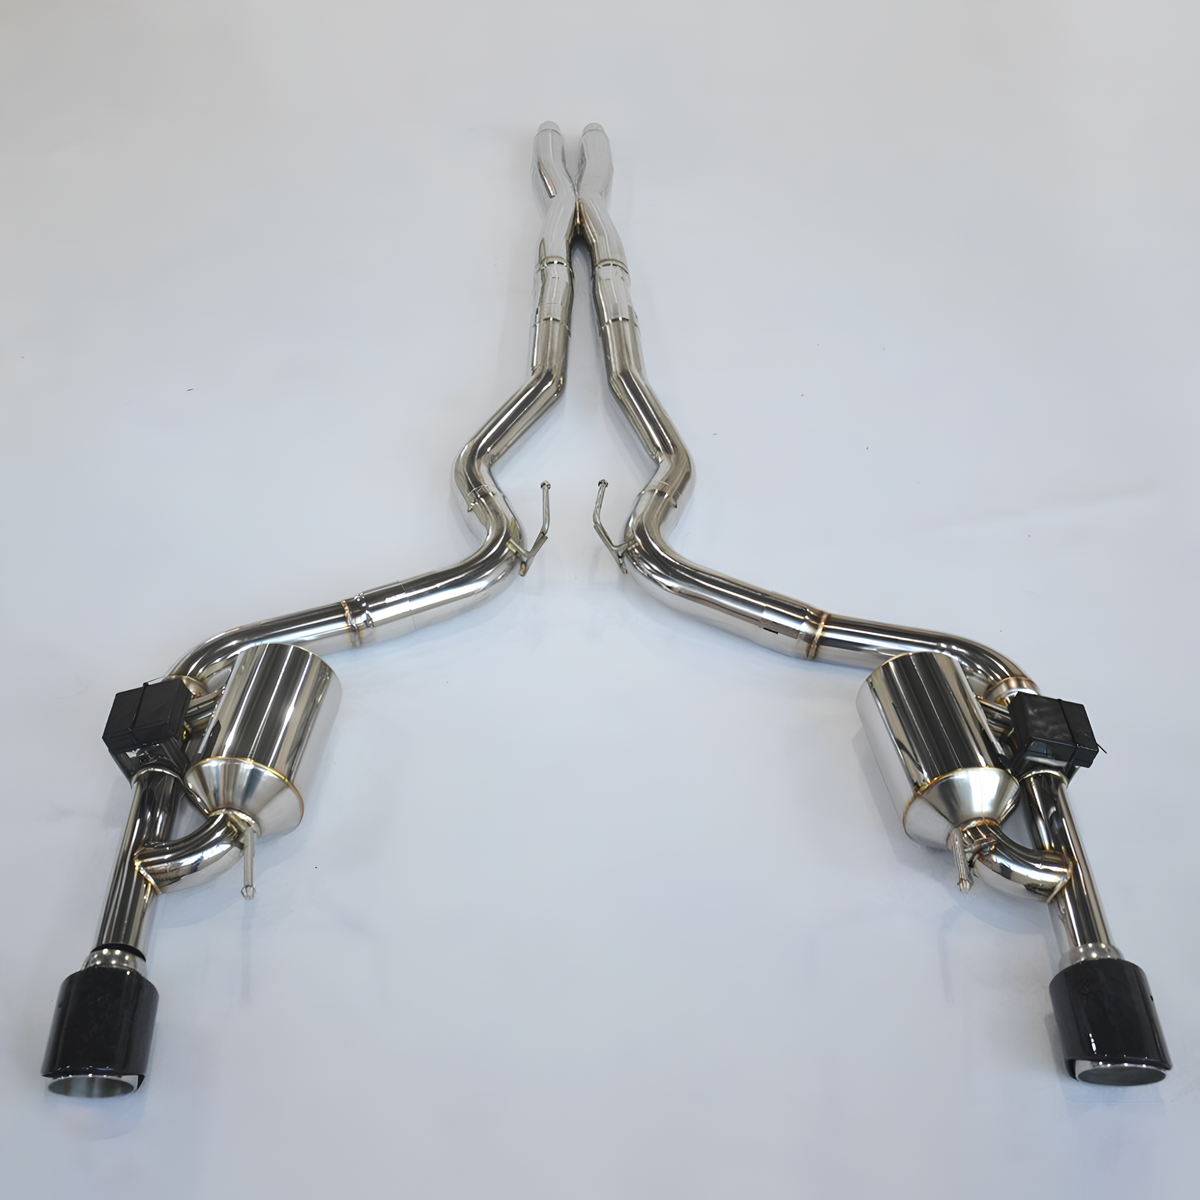 Rstype EXHAUST CATBACK For Ford Mustang 2013-2019 5.0L